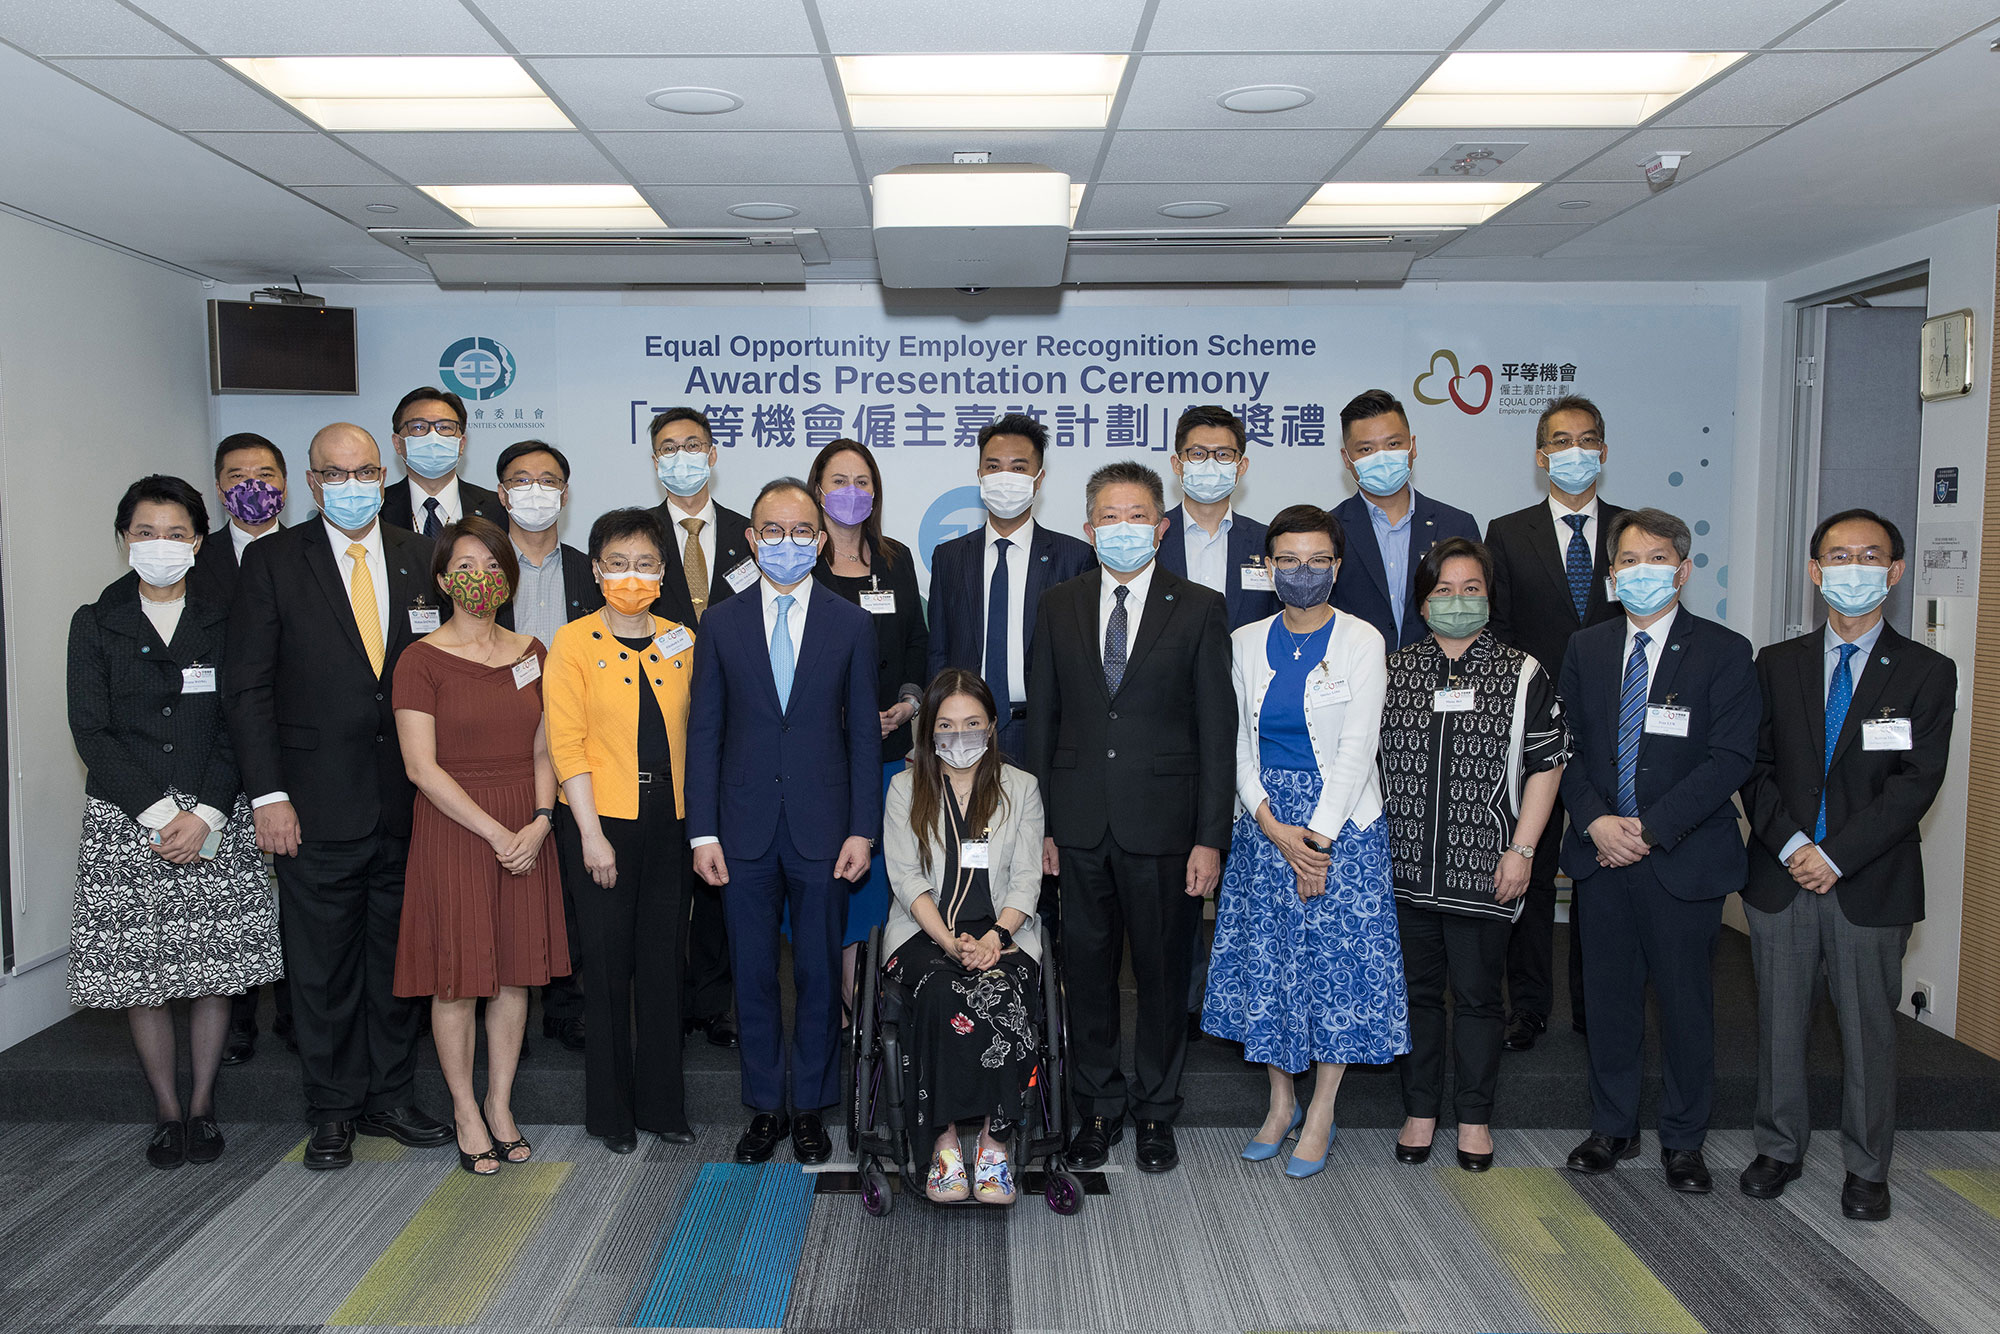 Mr Erick TSANG Kwok-wai, IDSM, JP, Secretary for Constitutional and Mainland Affairs (front row, fifth left) and Mr Ricky CHU Man-kin, IDS, Chairperson of the EOC (front row, fifth right) join in a group photo with Members of the EOC and the management team.